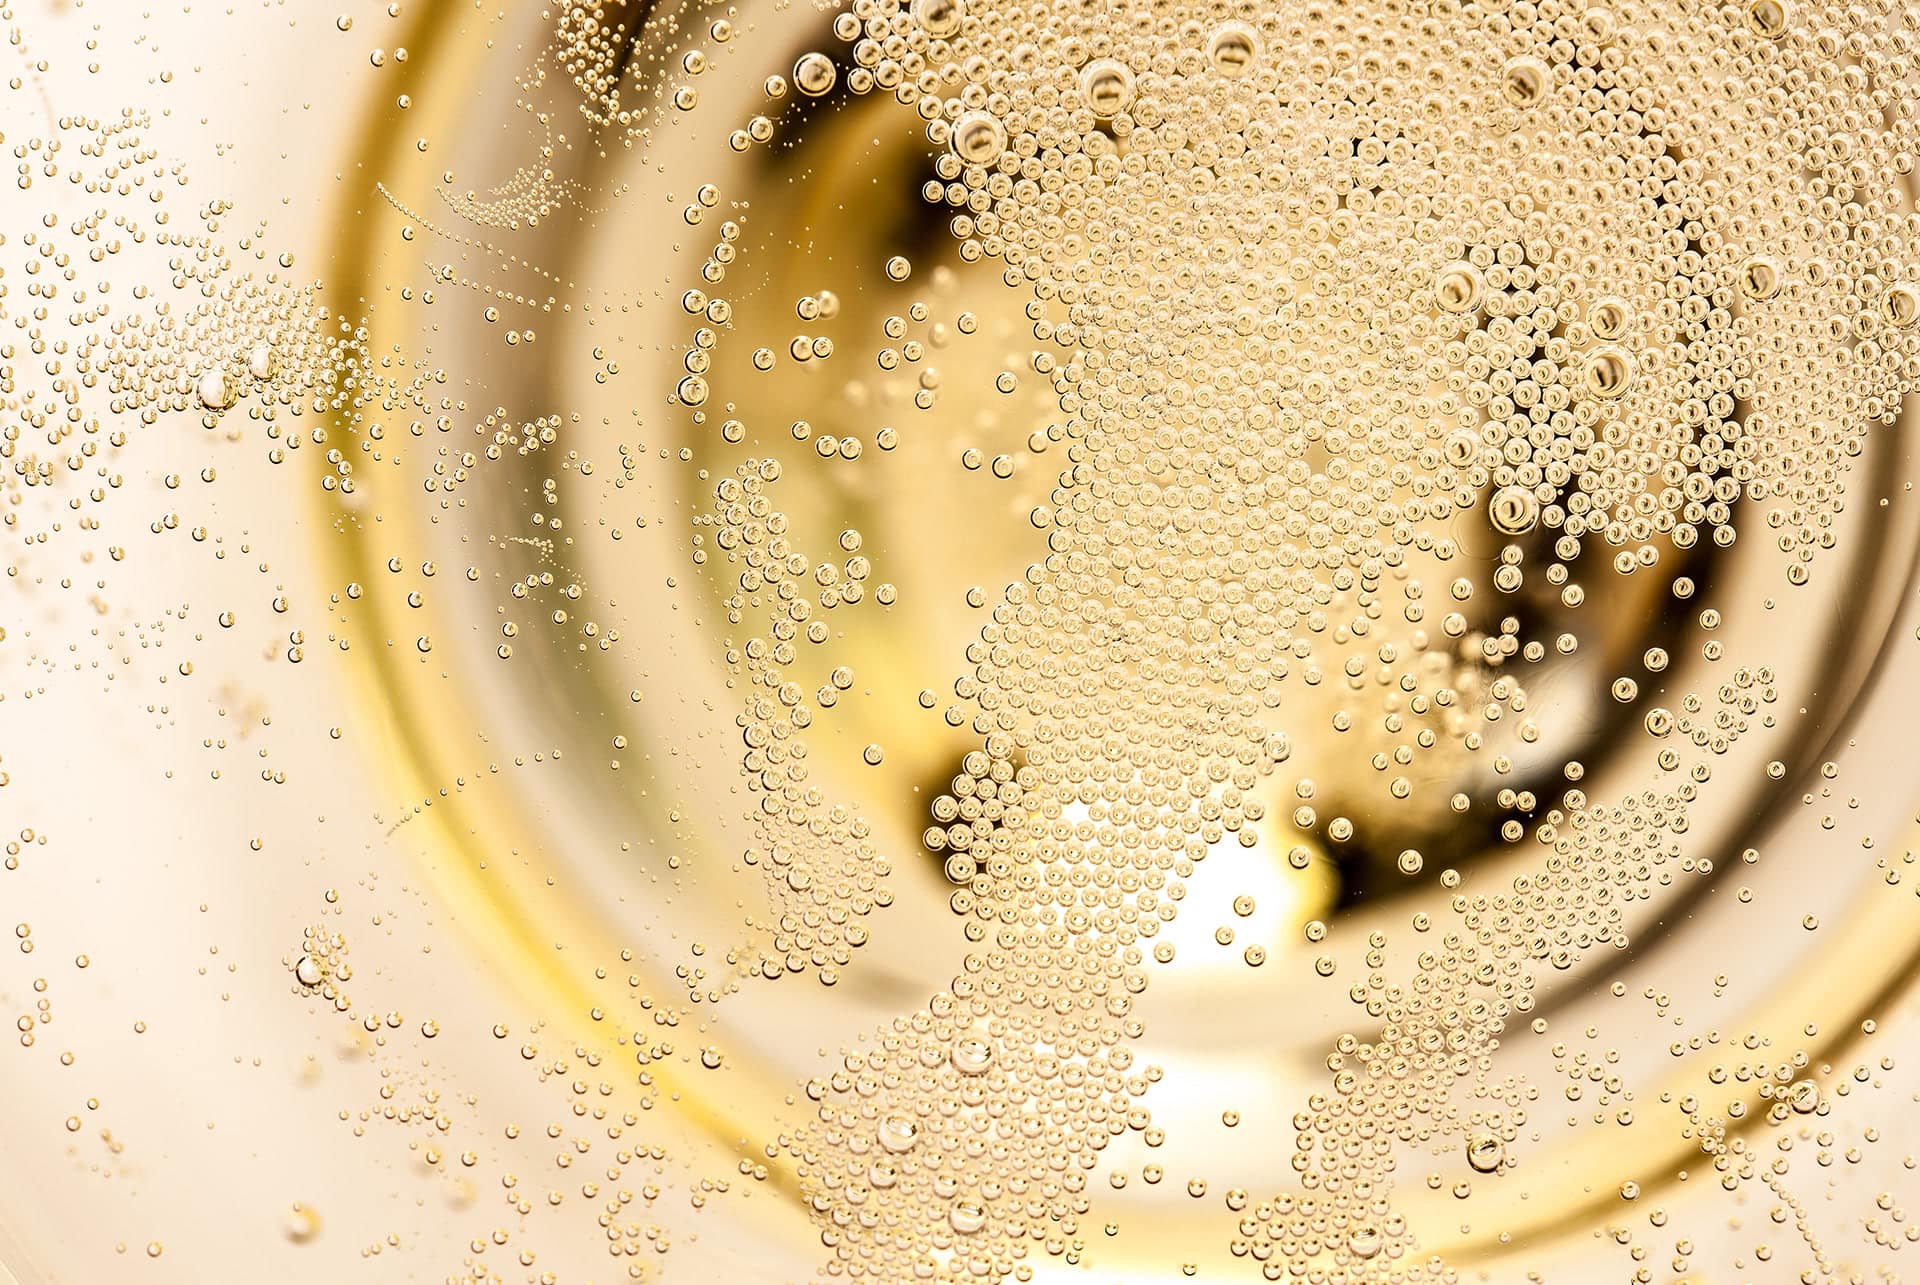 Cava - All info about the Spanish sparkling wine